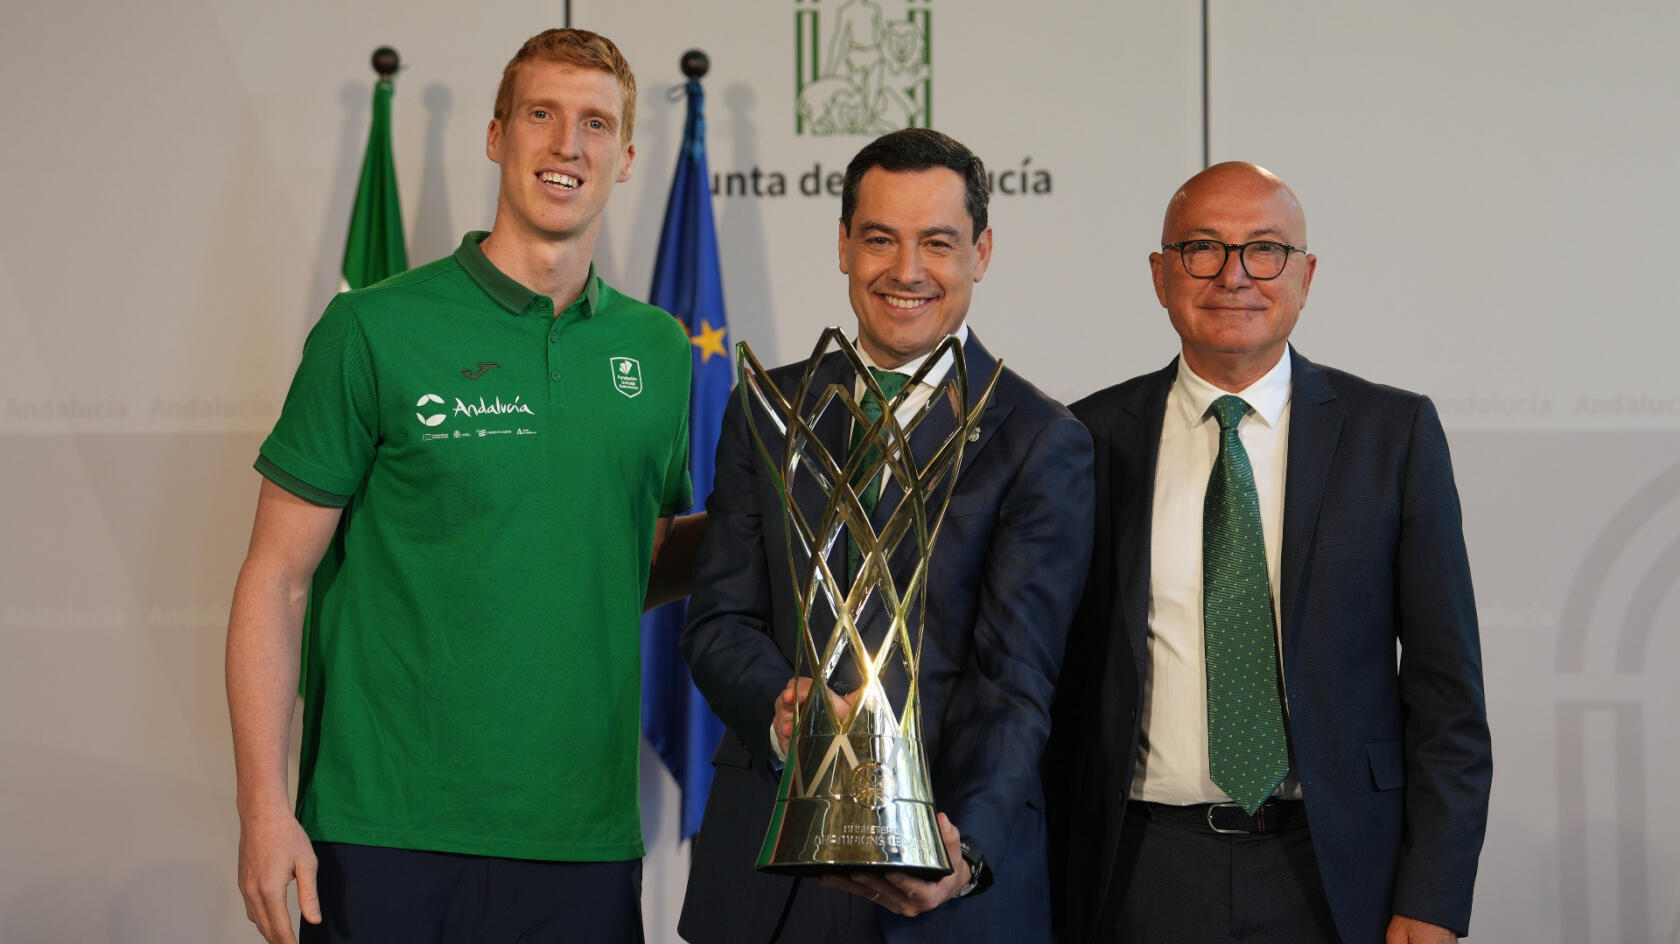 The president of Junta de Andalucía receives Unicaja after the big success in BCL